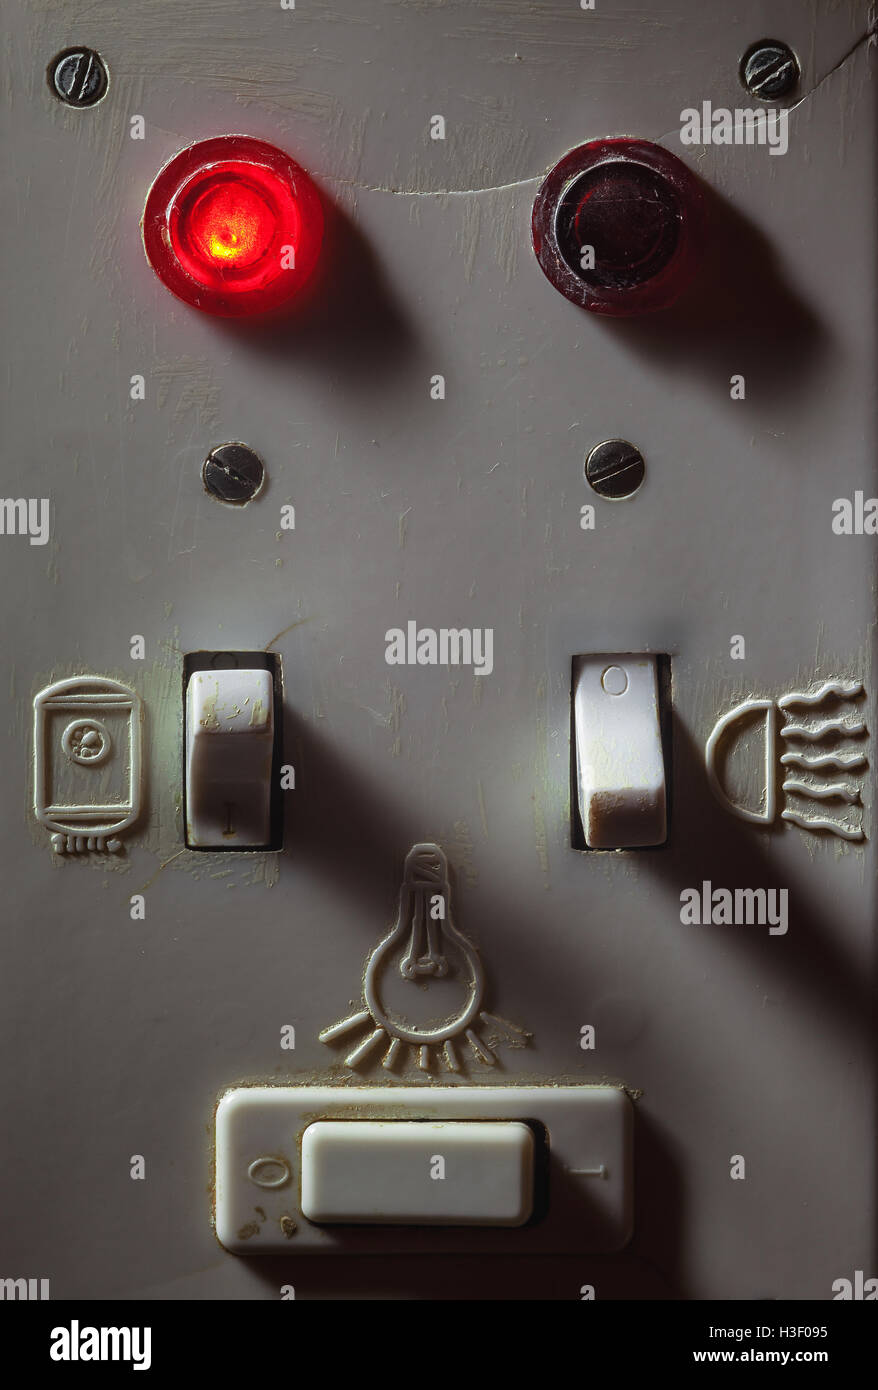 Details of an old dirty plastic switches for bathroom, red light is on for boiler. Stock Photo